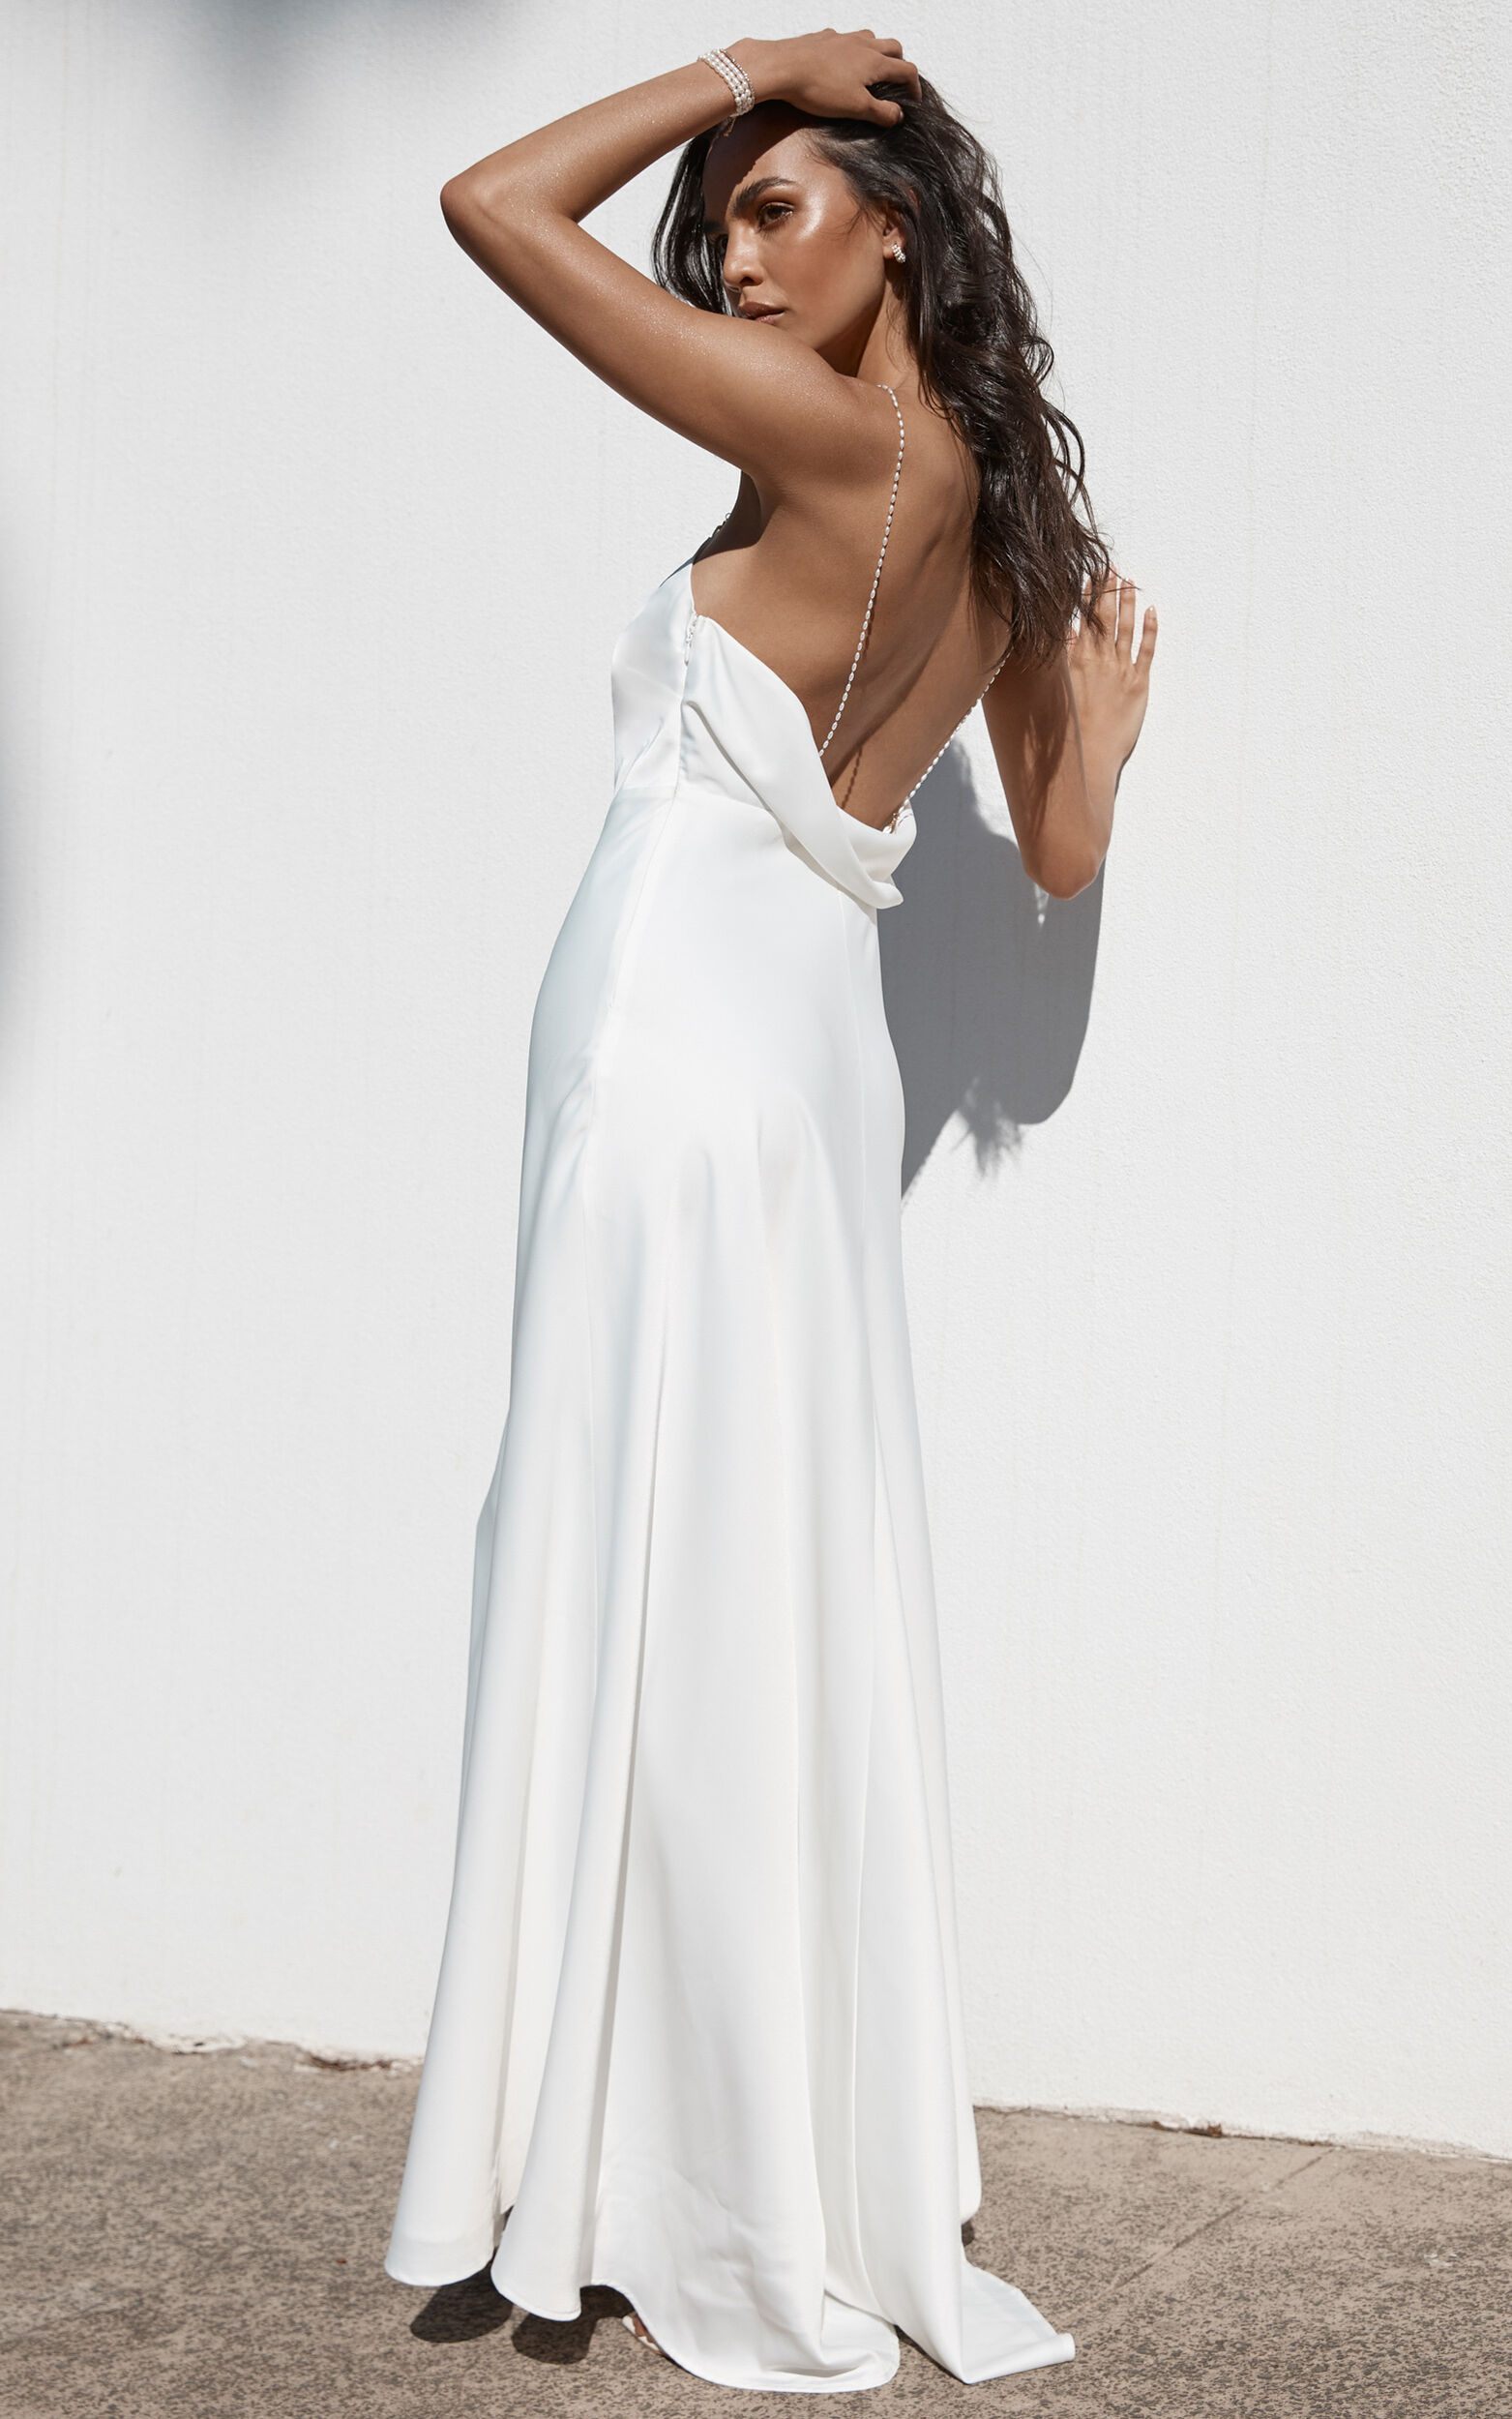 Entwined Dreams Pearl Strap Cowl Back Gown in Ivory - 06, WHT1